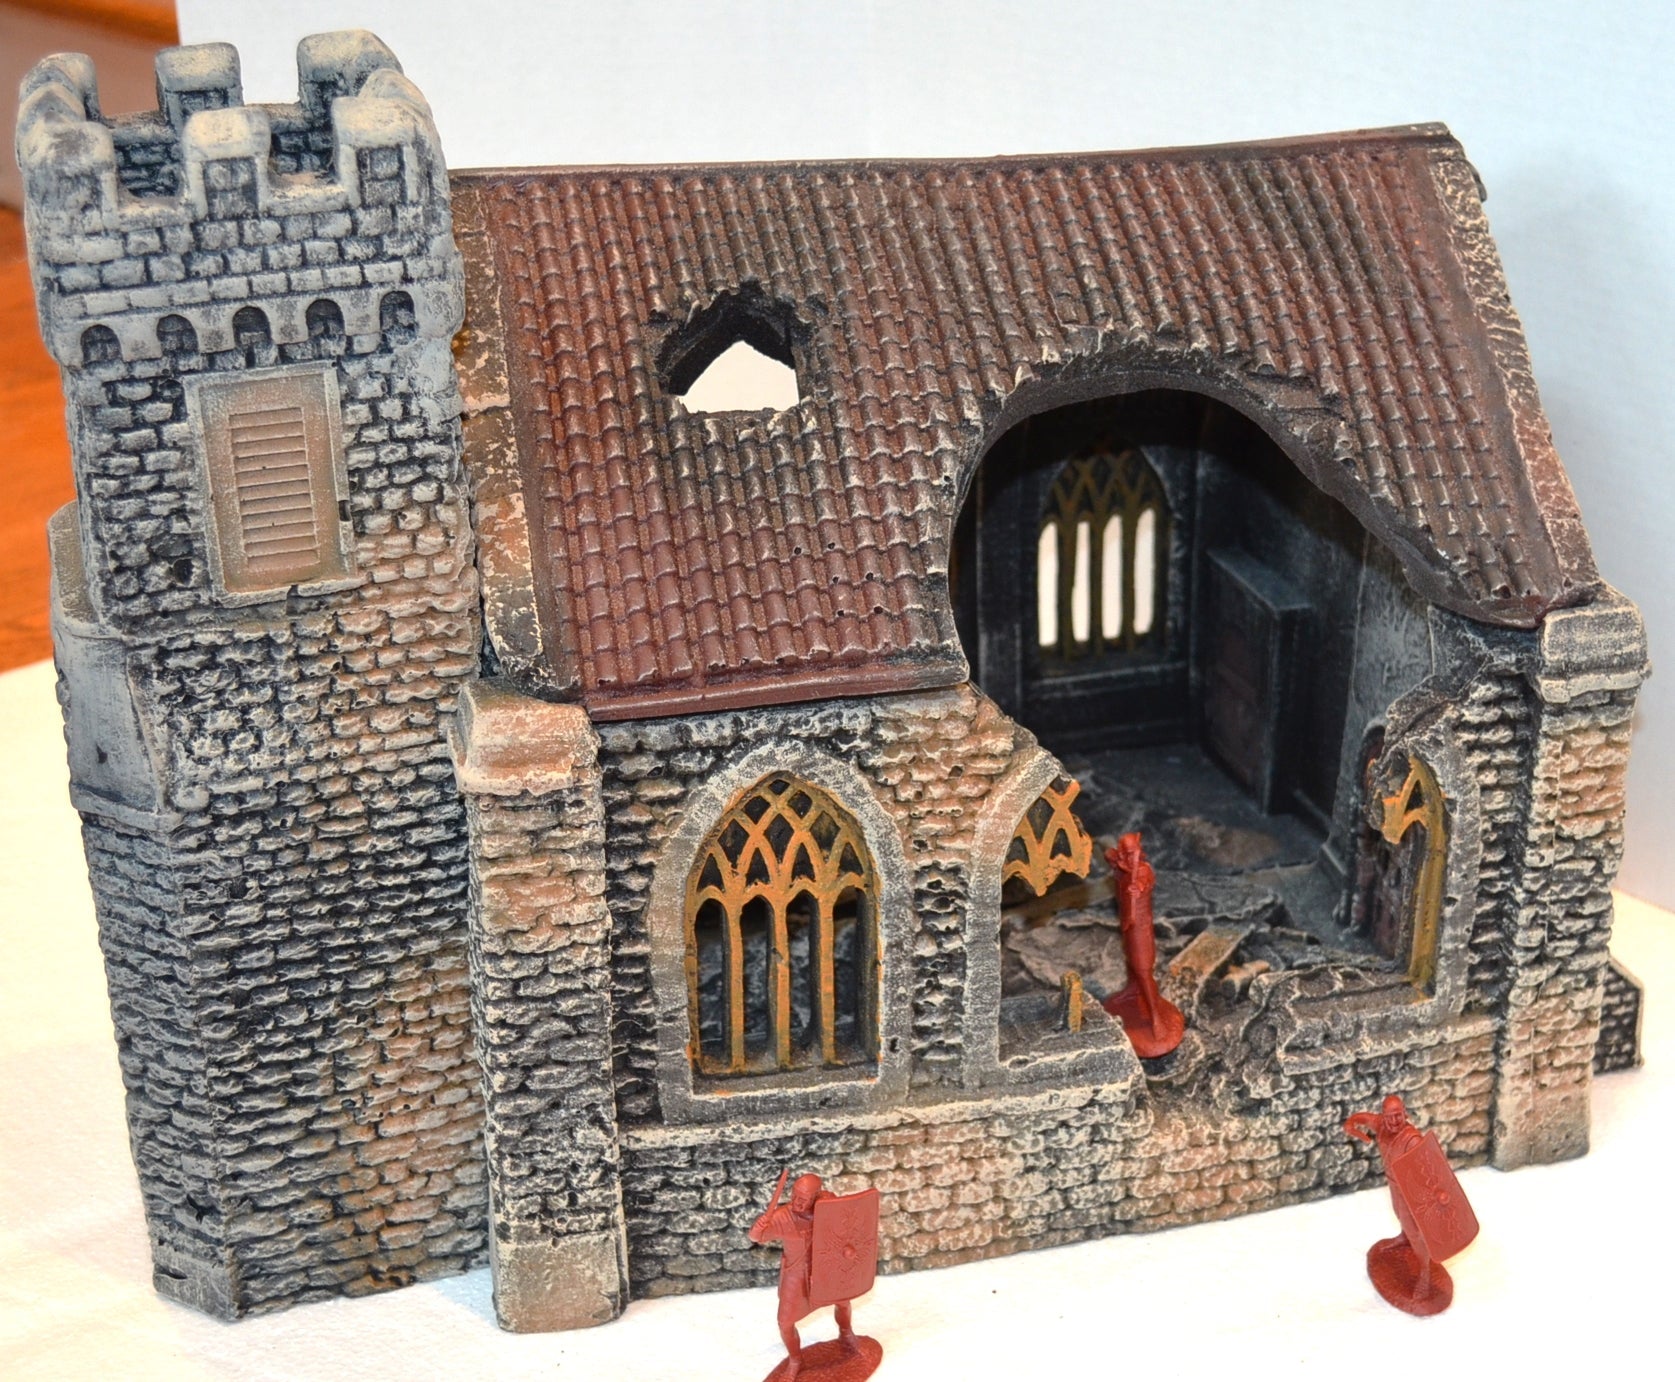 ATHERTON SCENICS PAINTED MEDIEVAL BATTLE DAMAGED STONE CHURCH WWII - 9948